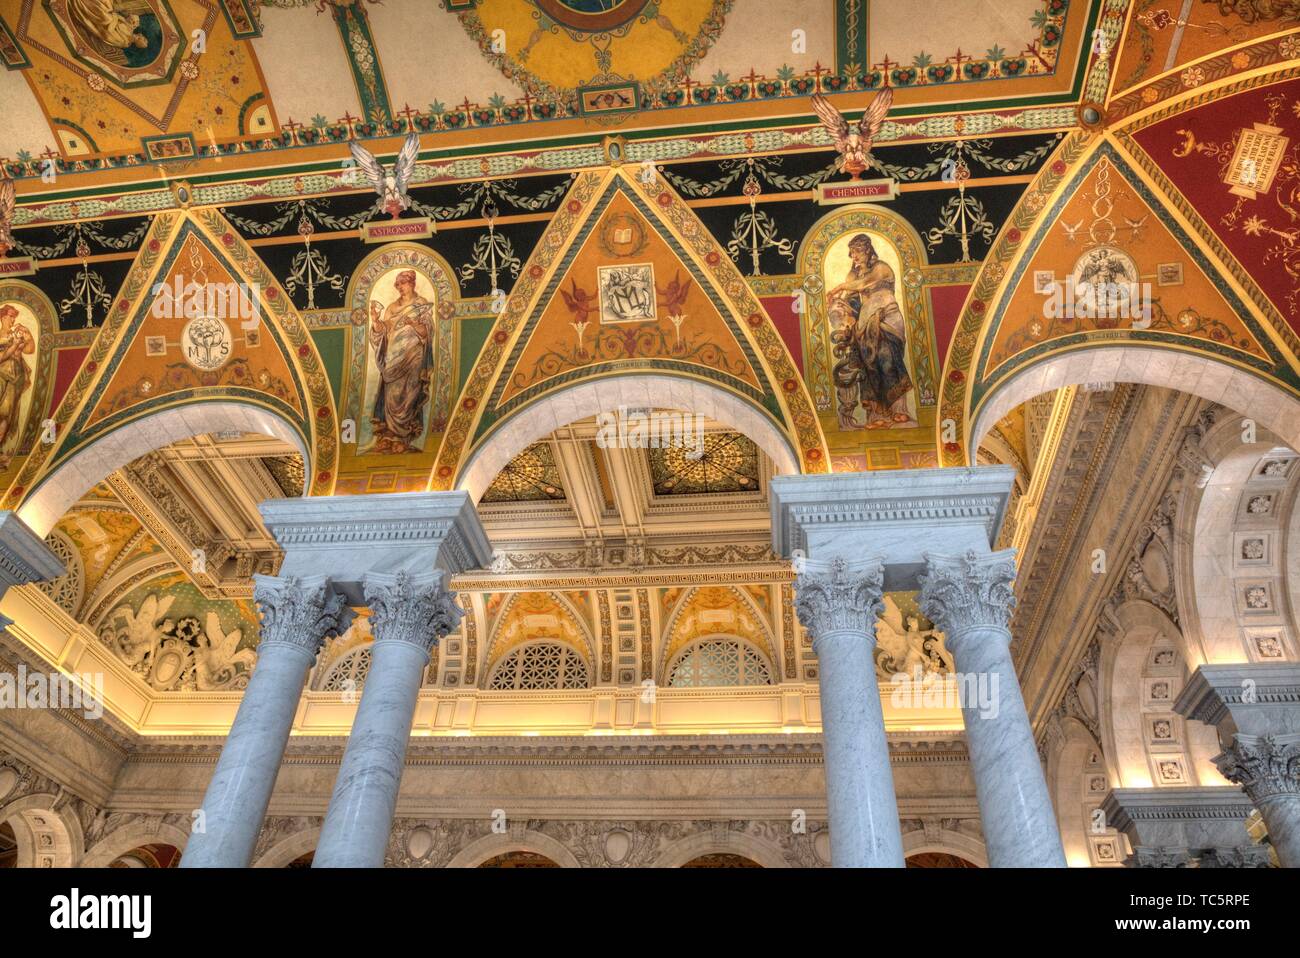 Ceiling and Walls, Mezzanine of the Great hall, Library of Congress, Washington D.C., USA Stock Photo